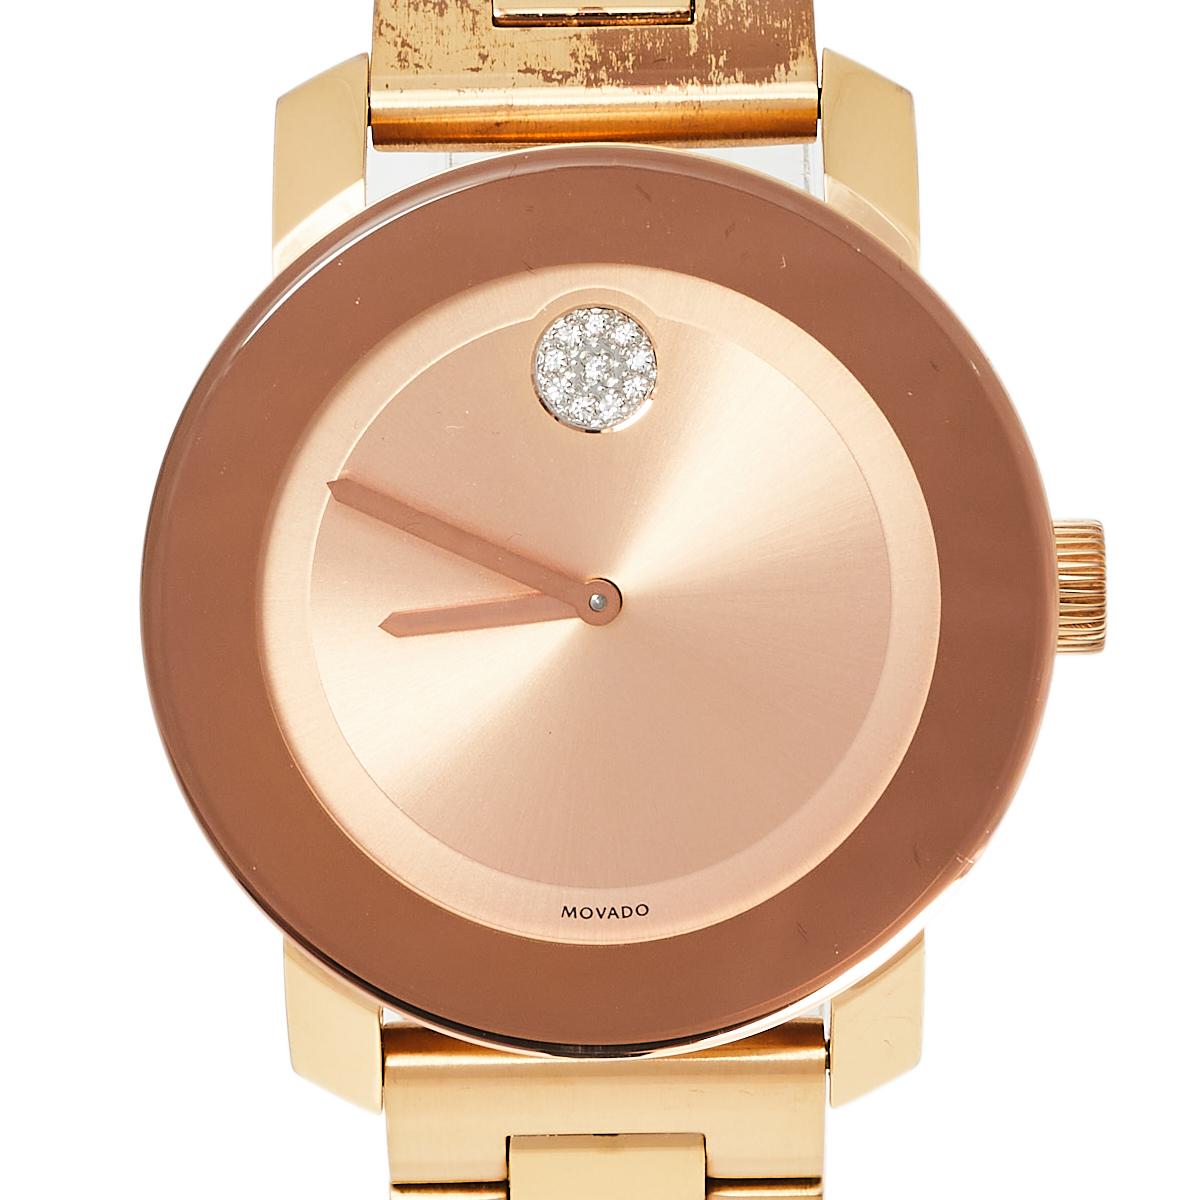 Built to assist you every day, this Movado wristwatch comes made from rose gold-plated stainless steel. The quartz watch features a rose gold dial with two hands and the signature Movado dot beautifully embellished with crystals. It is